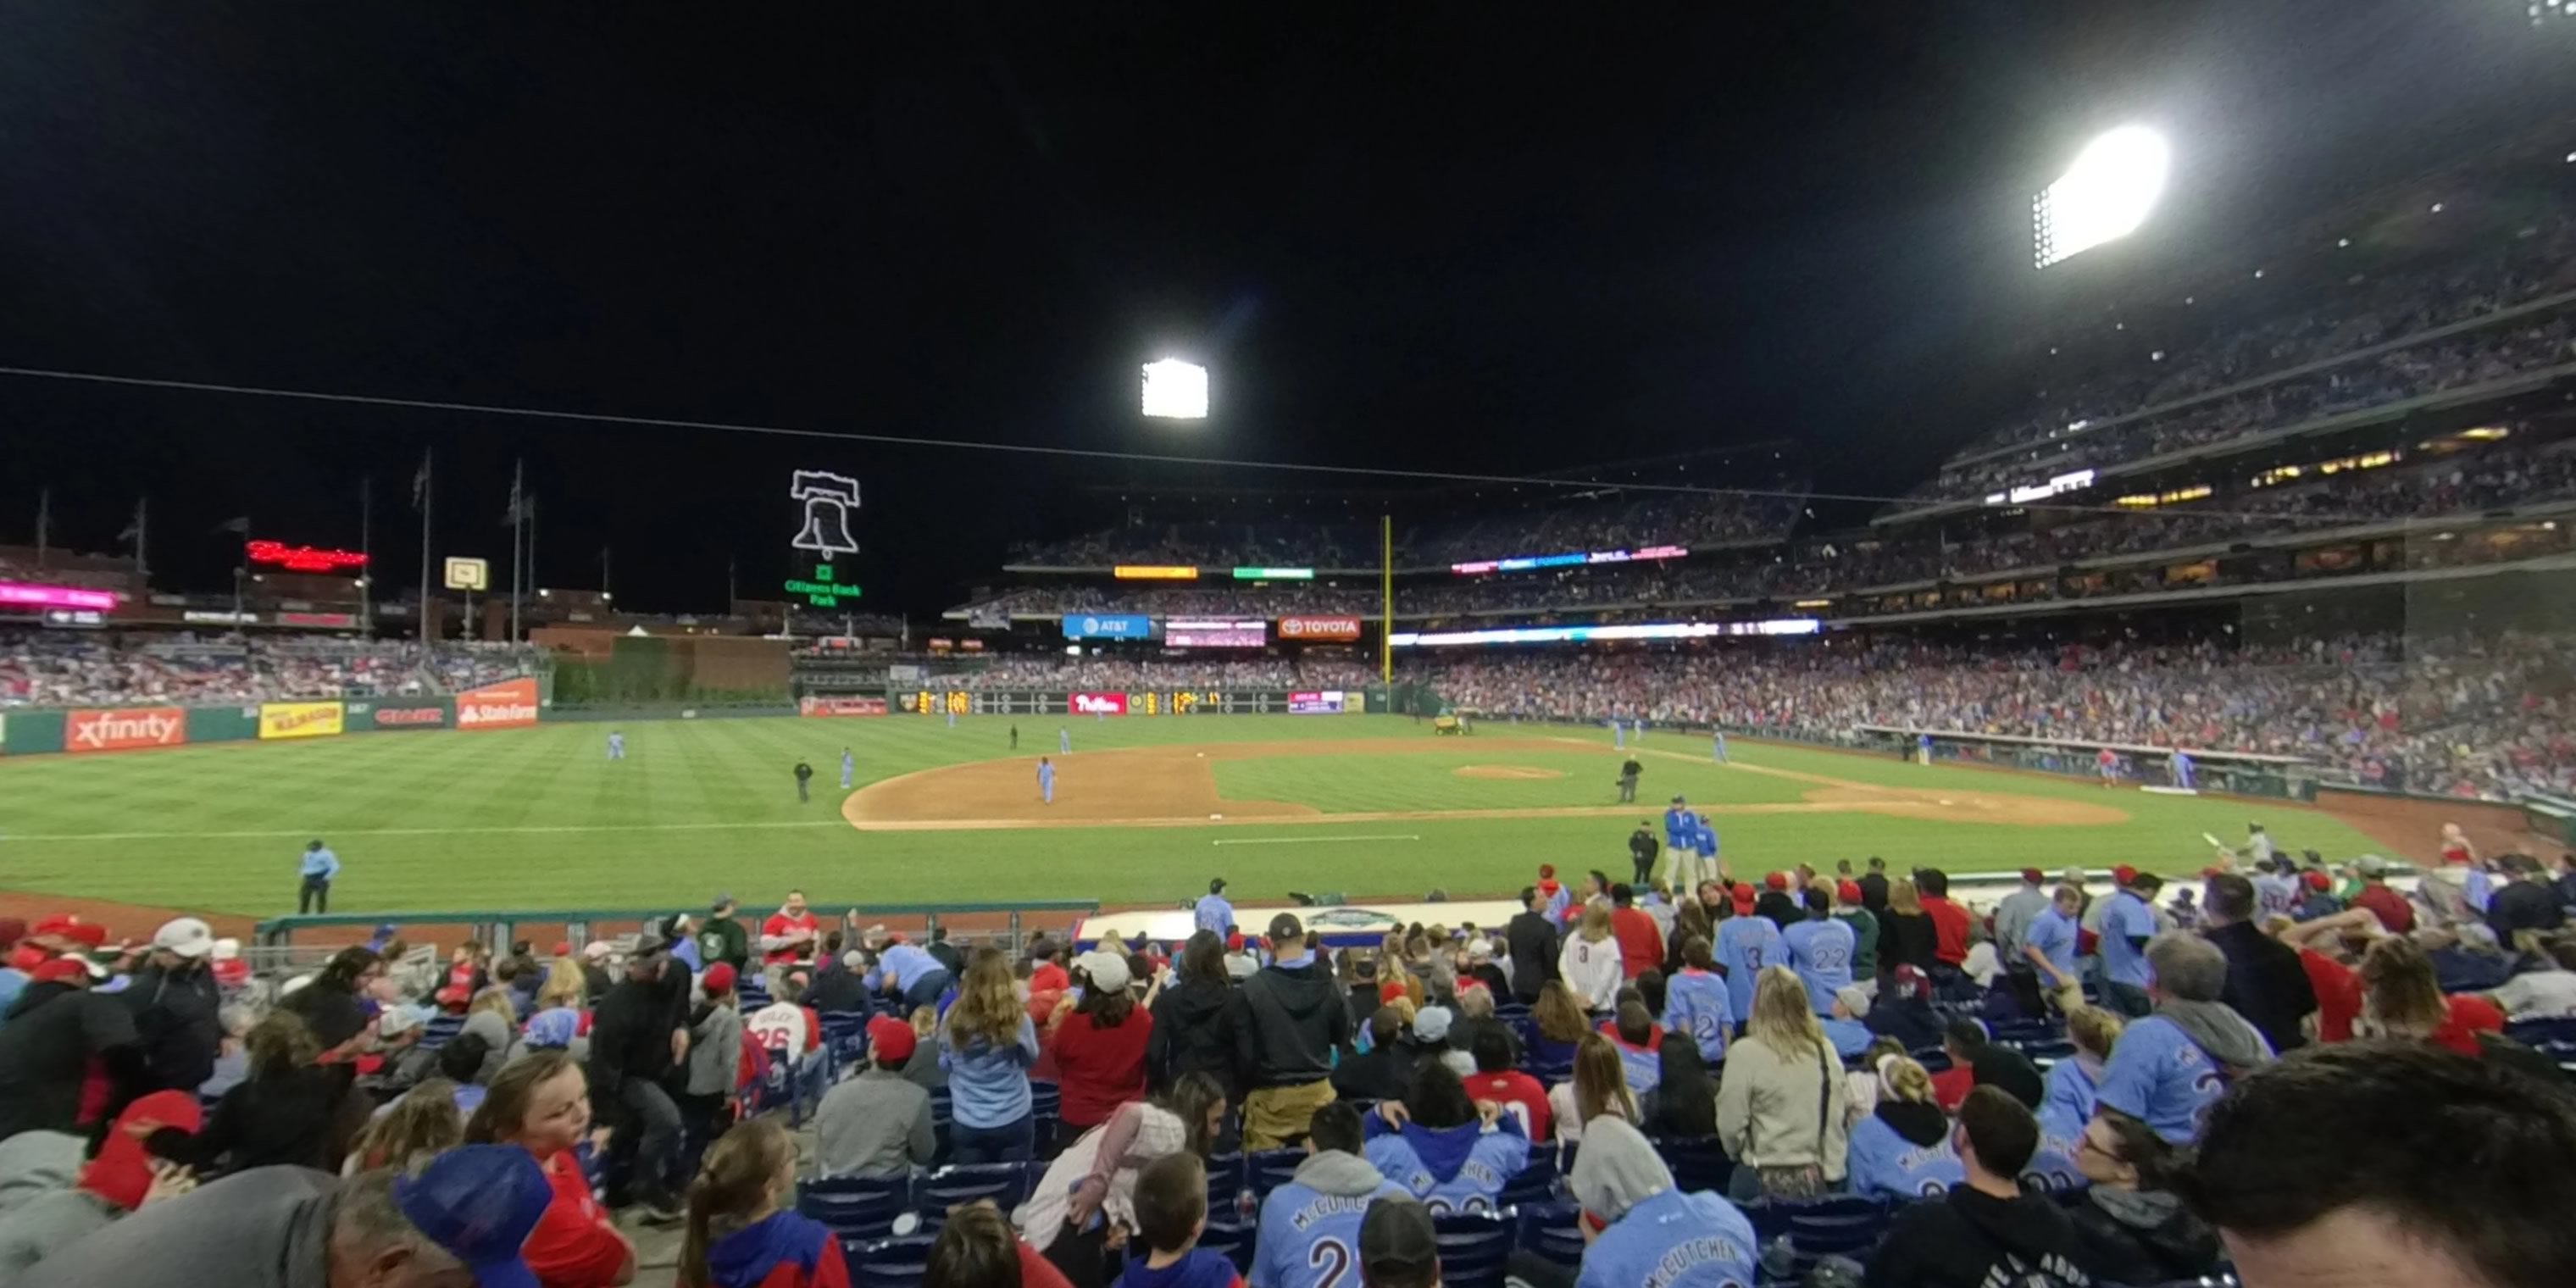 section 131 panoramic seat view  for baseball - citizens bank park